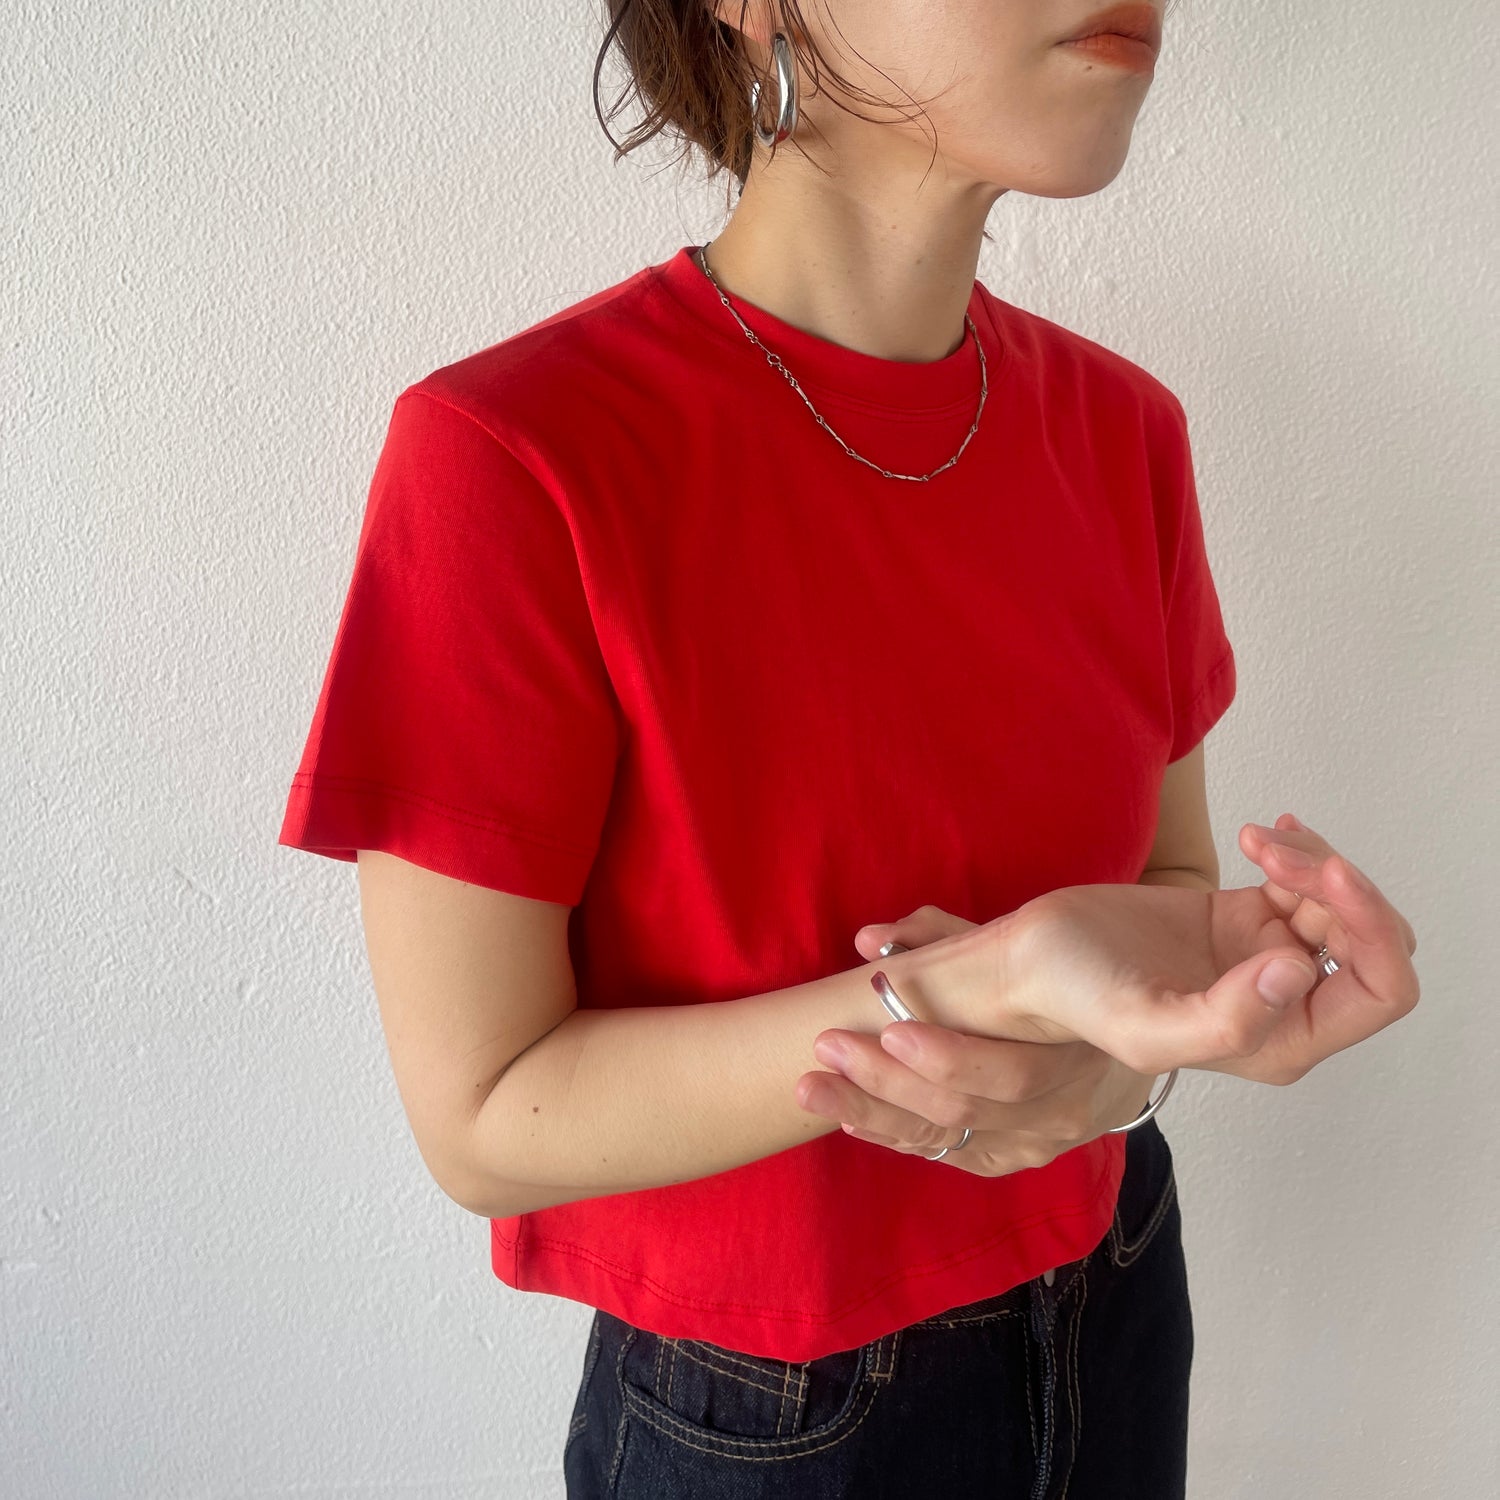 daily daily compact tee / red